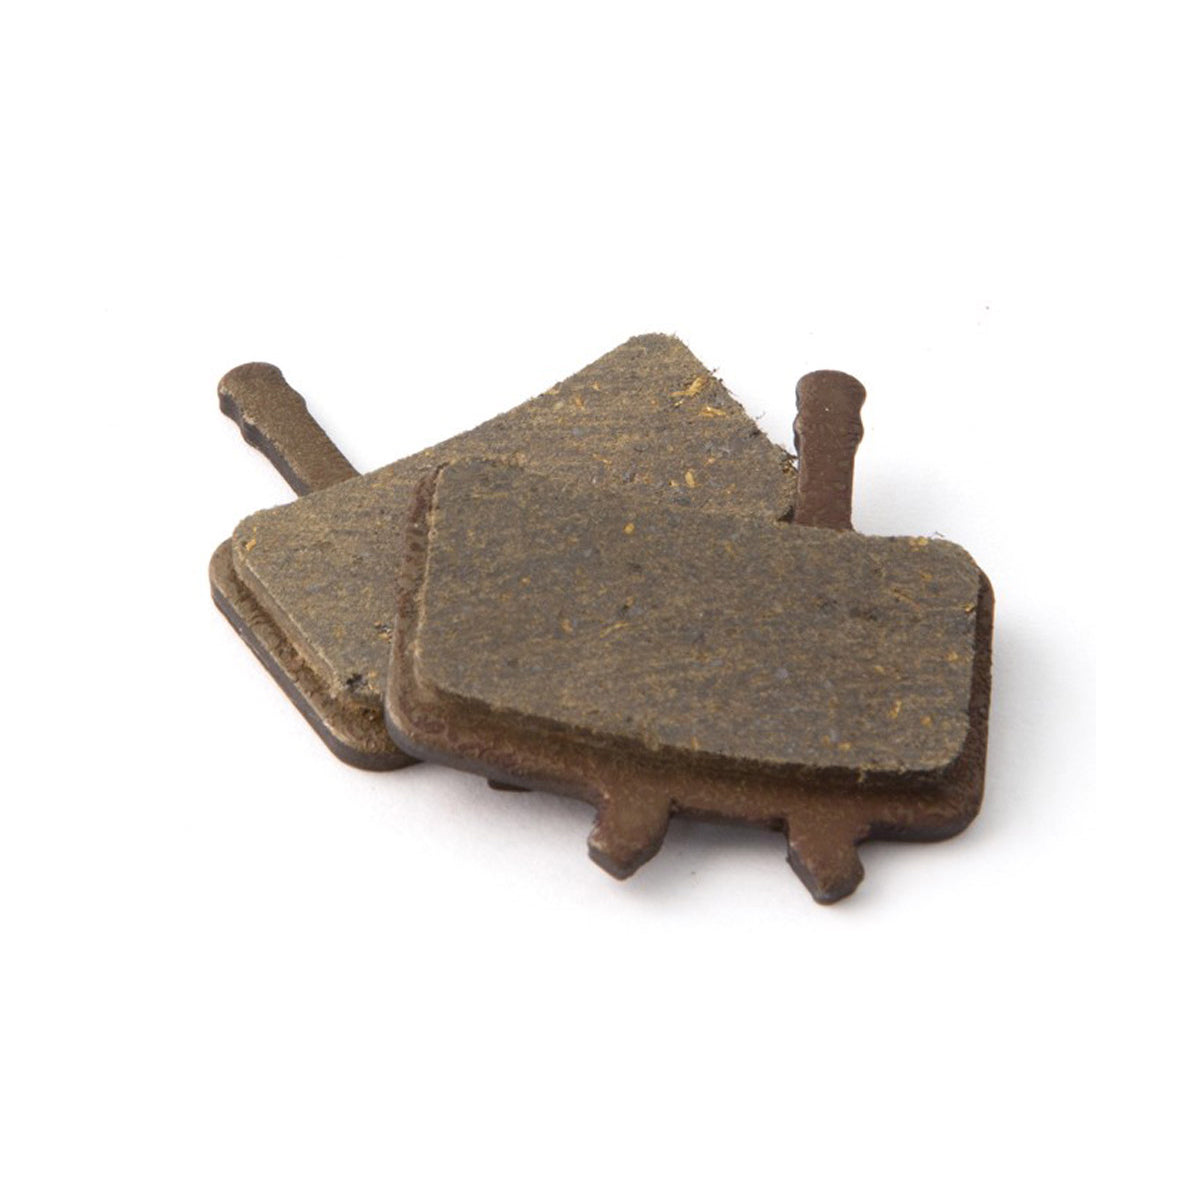 CLARKS ORGANIC DISC BRAKE PADS FOR AVID BB7/ALL JUICY SPRING INC.